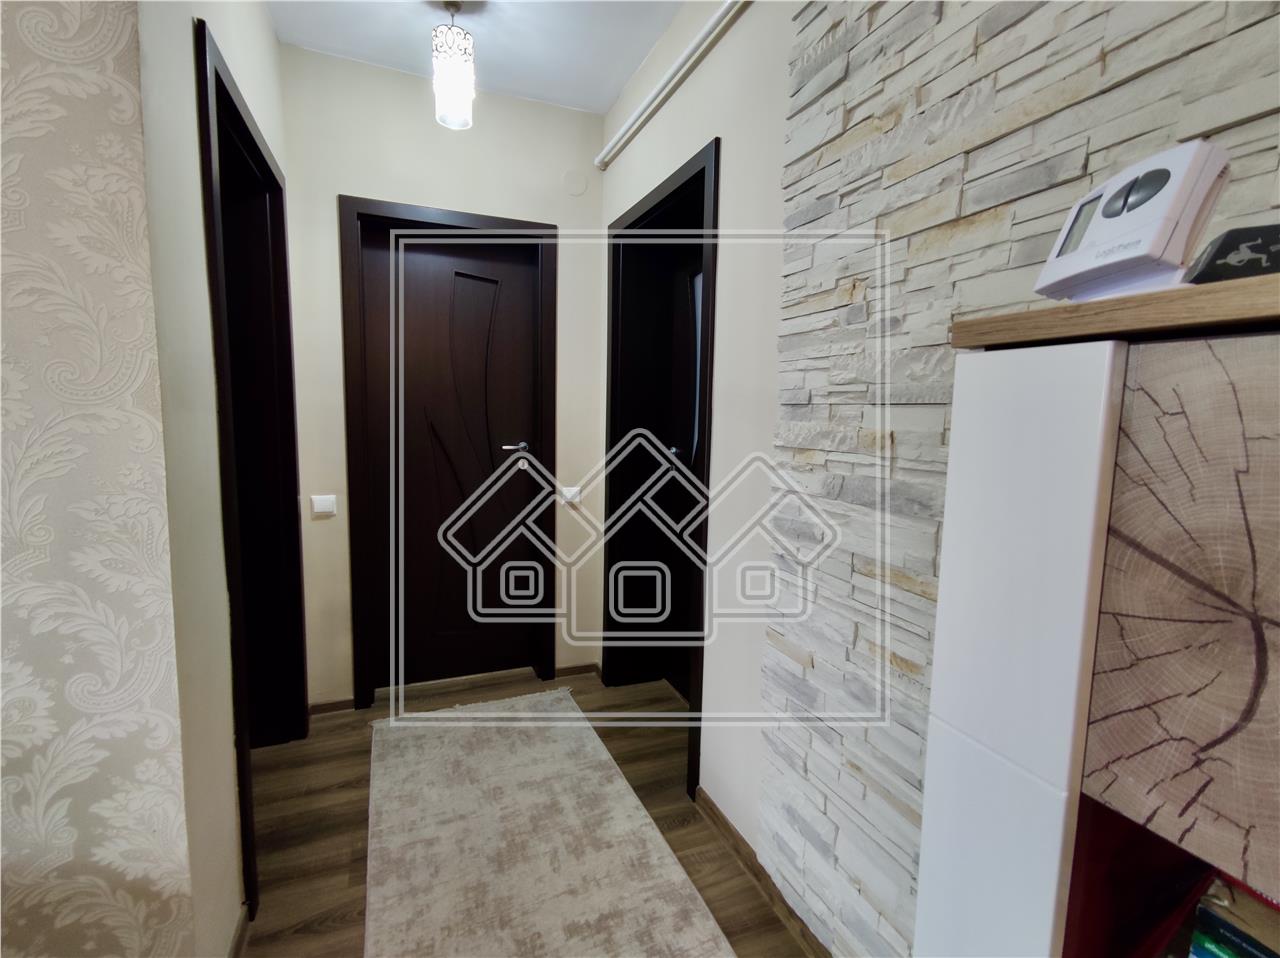 Apartment for sale - 3 rooms, 2 bathrooms - Brana area - modern